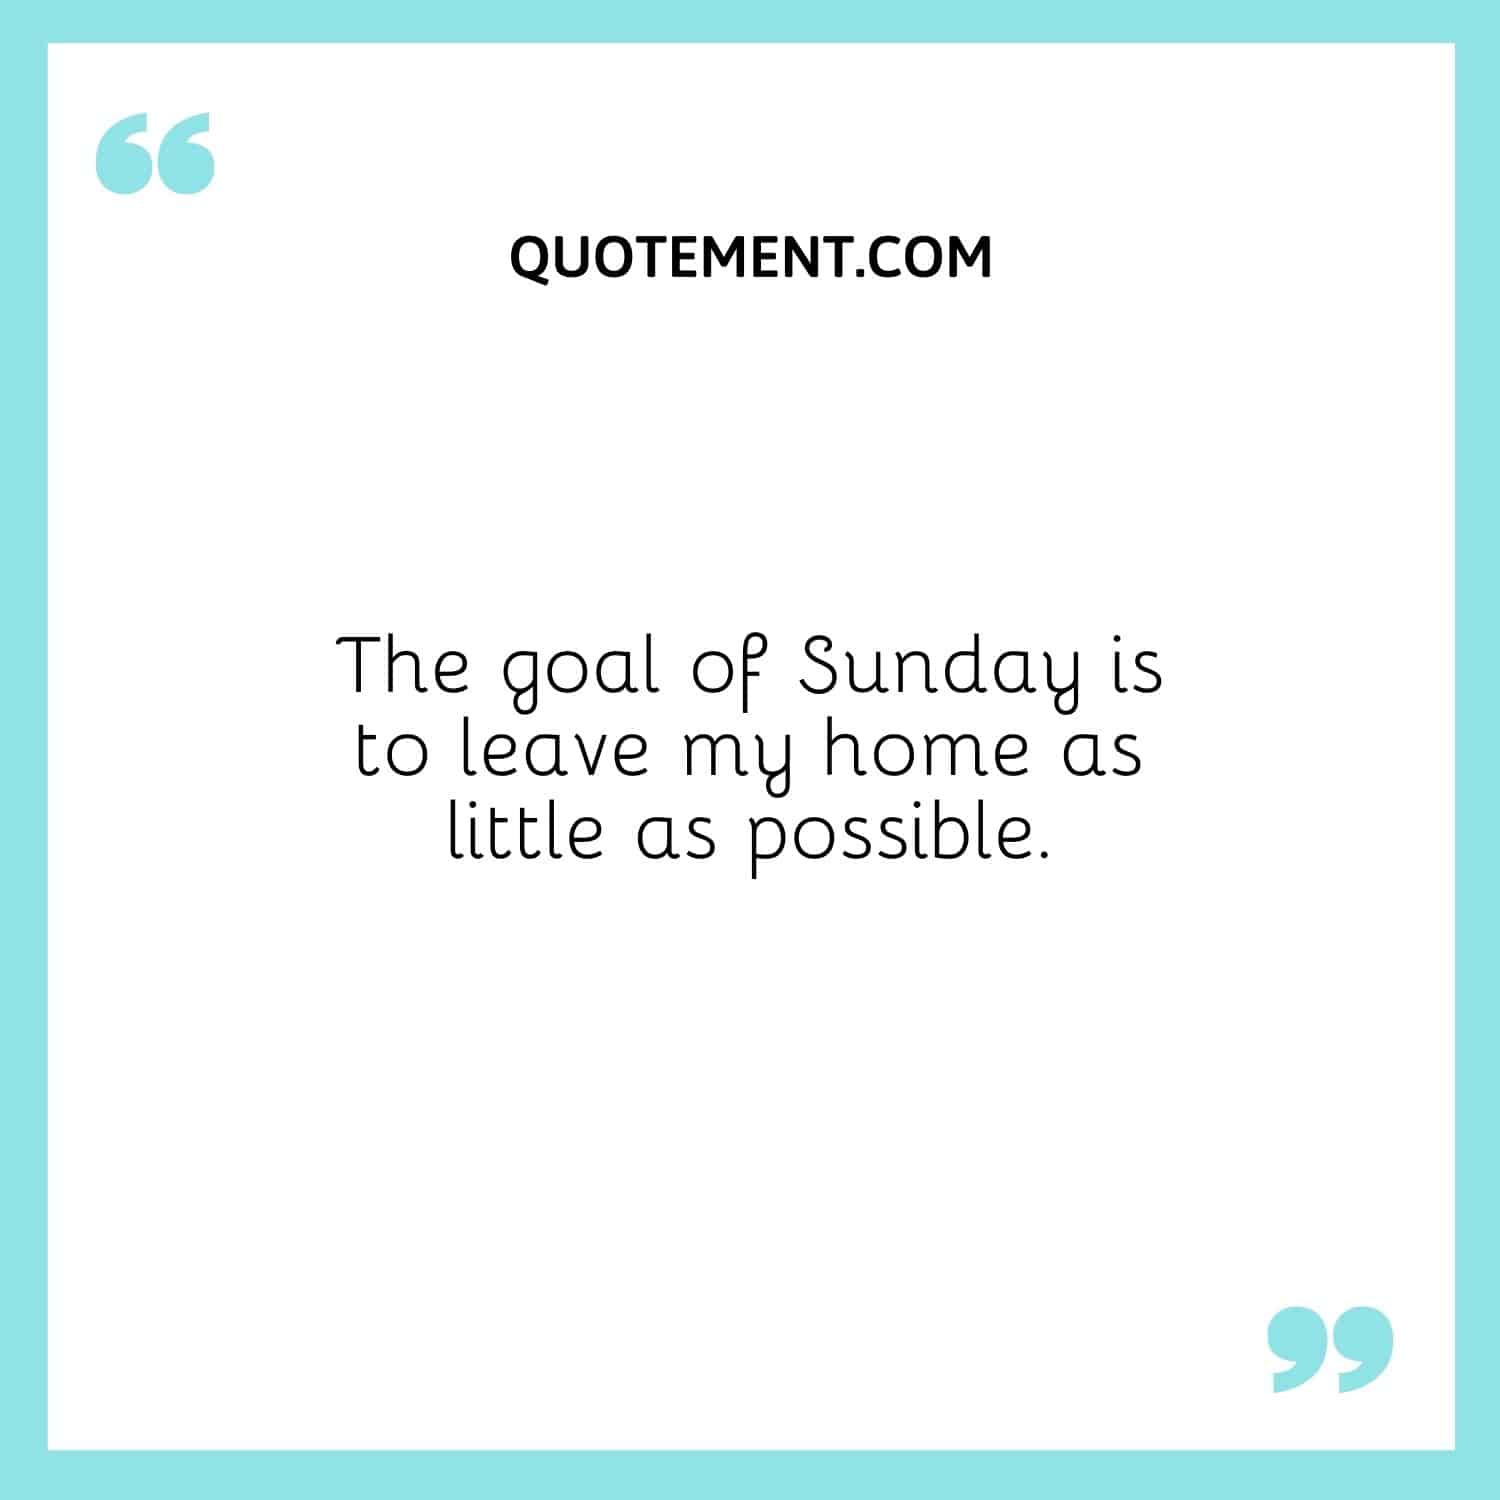 The goal of Sunday is to leave my home as little as possible.